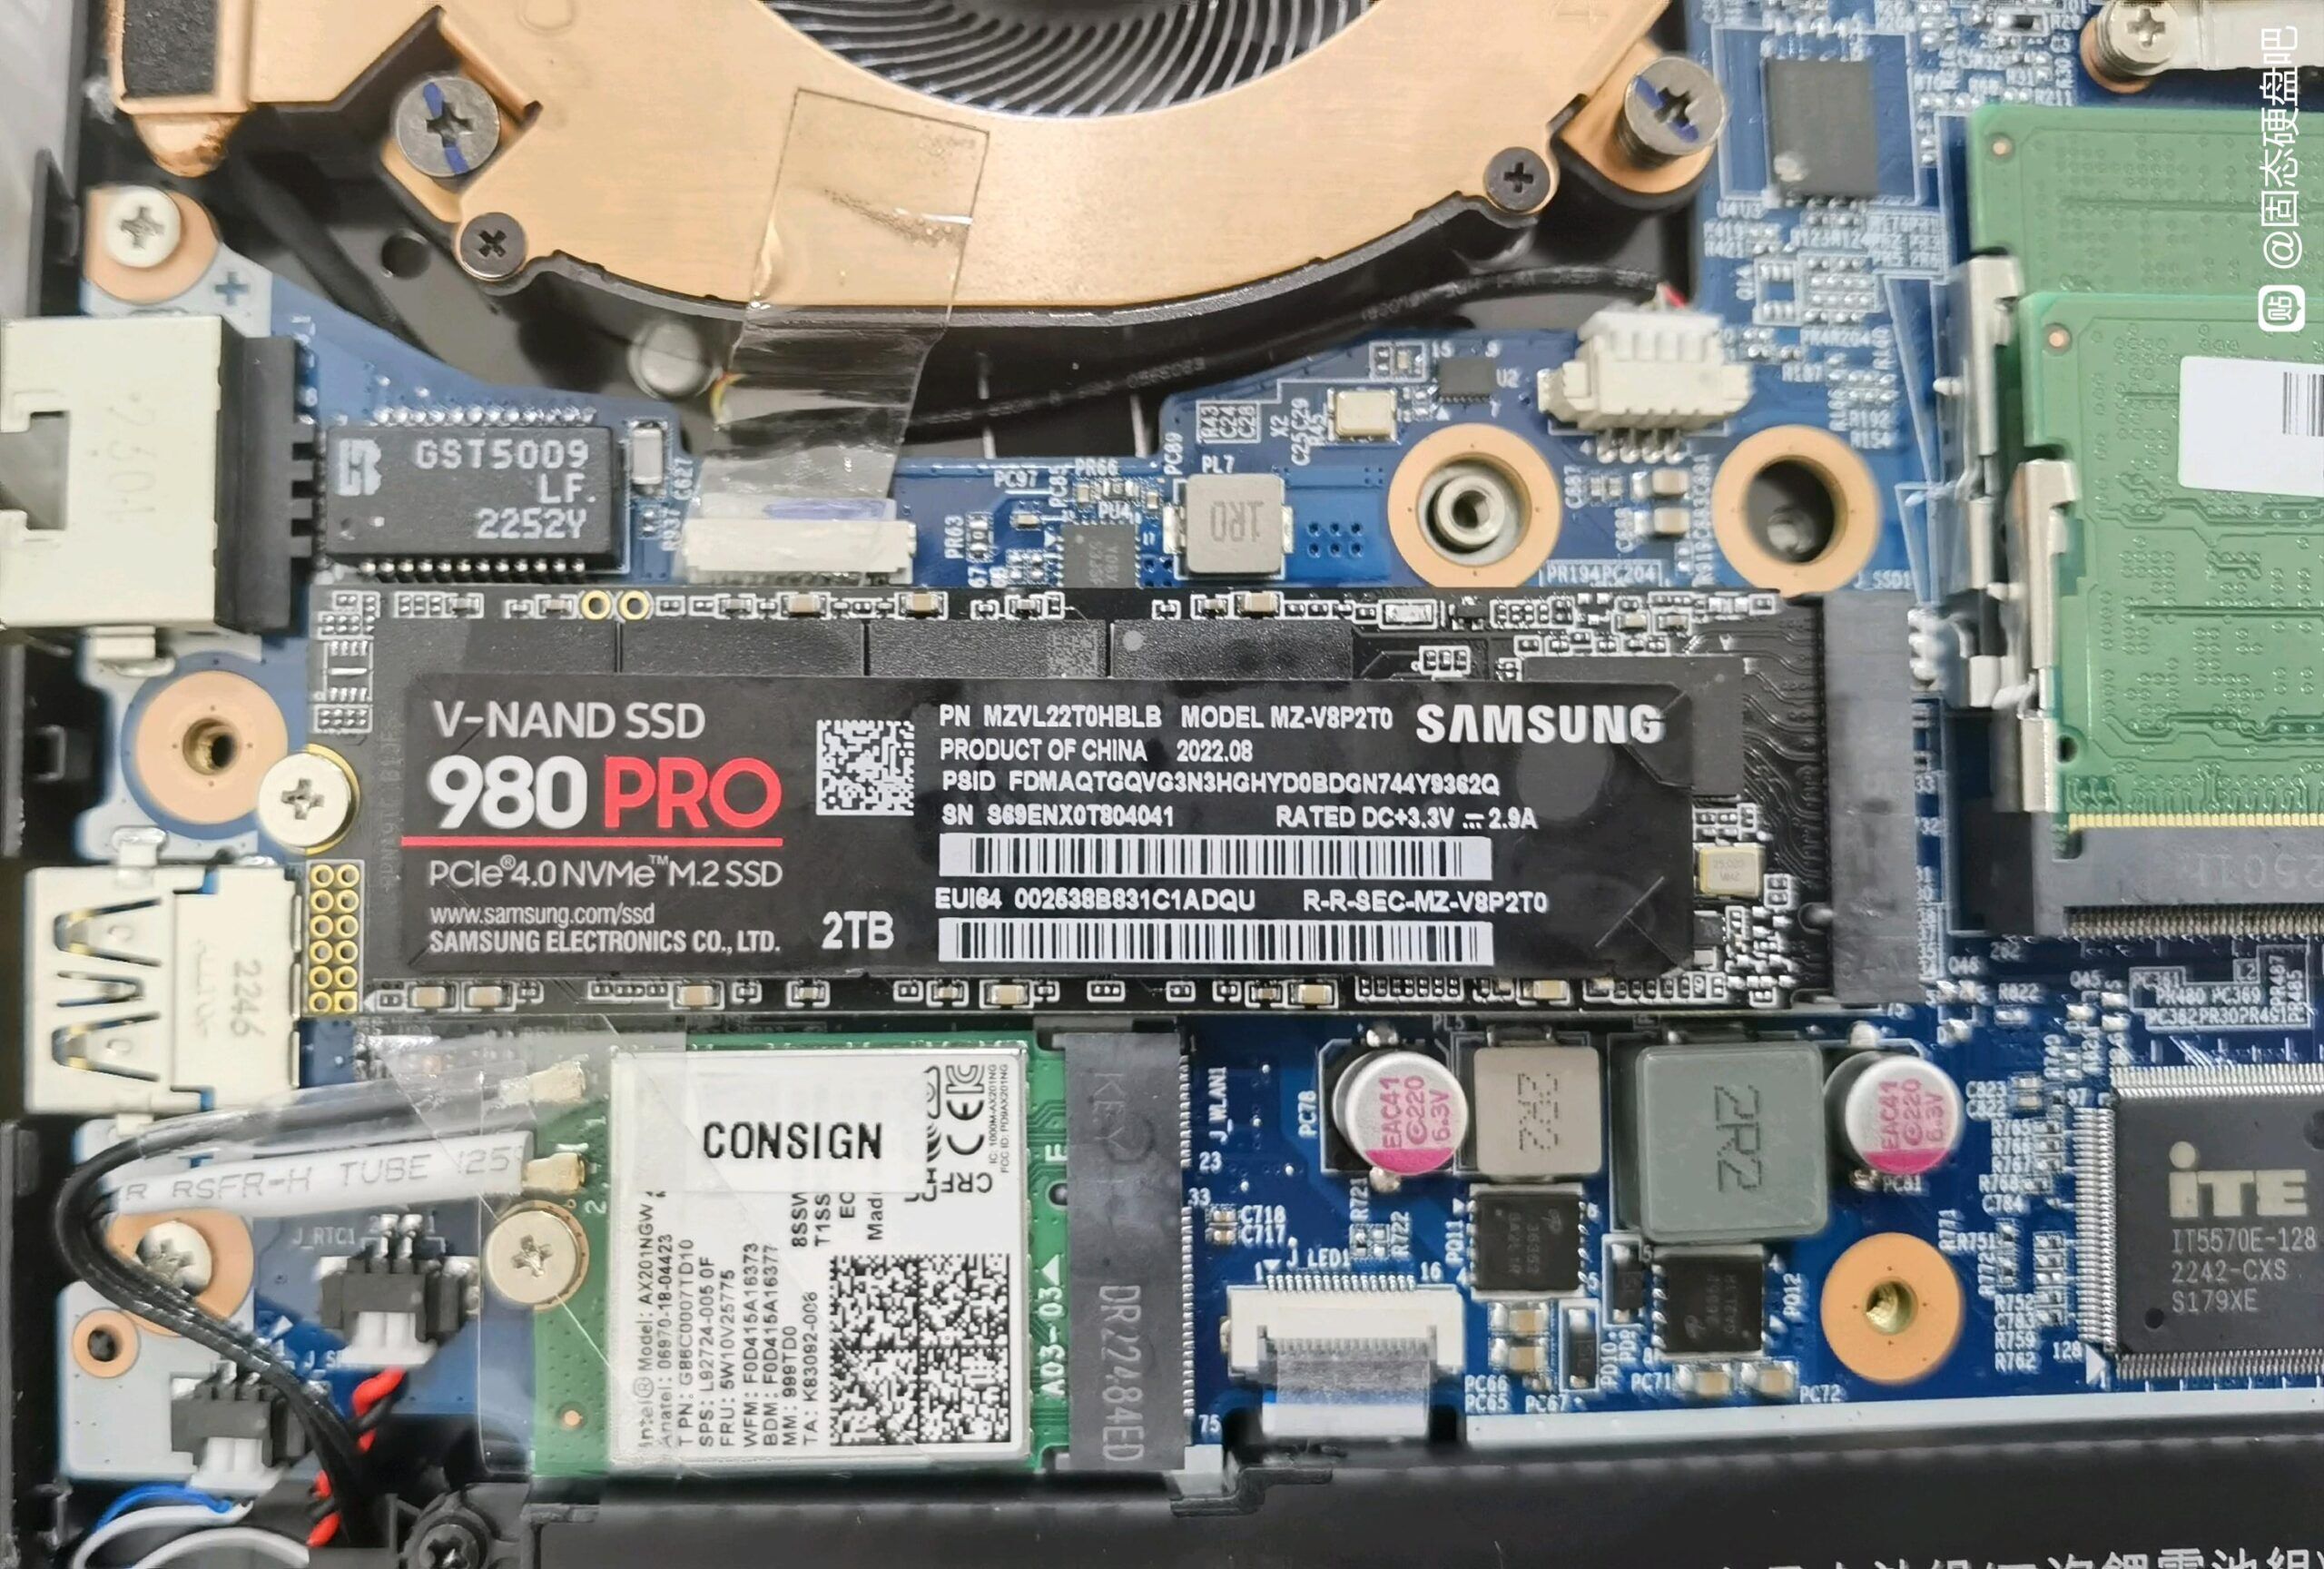 Beware: Counterfeit Samsung 980 PRO SSDs Circulating In The Market